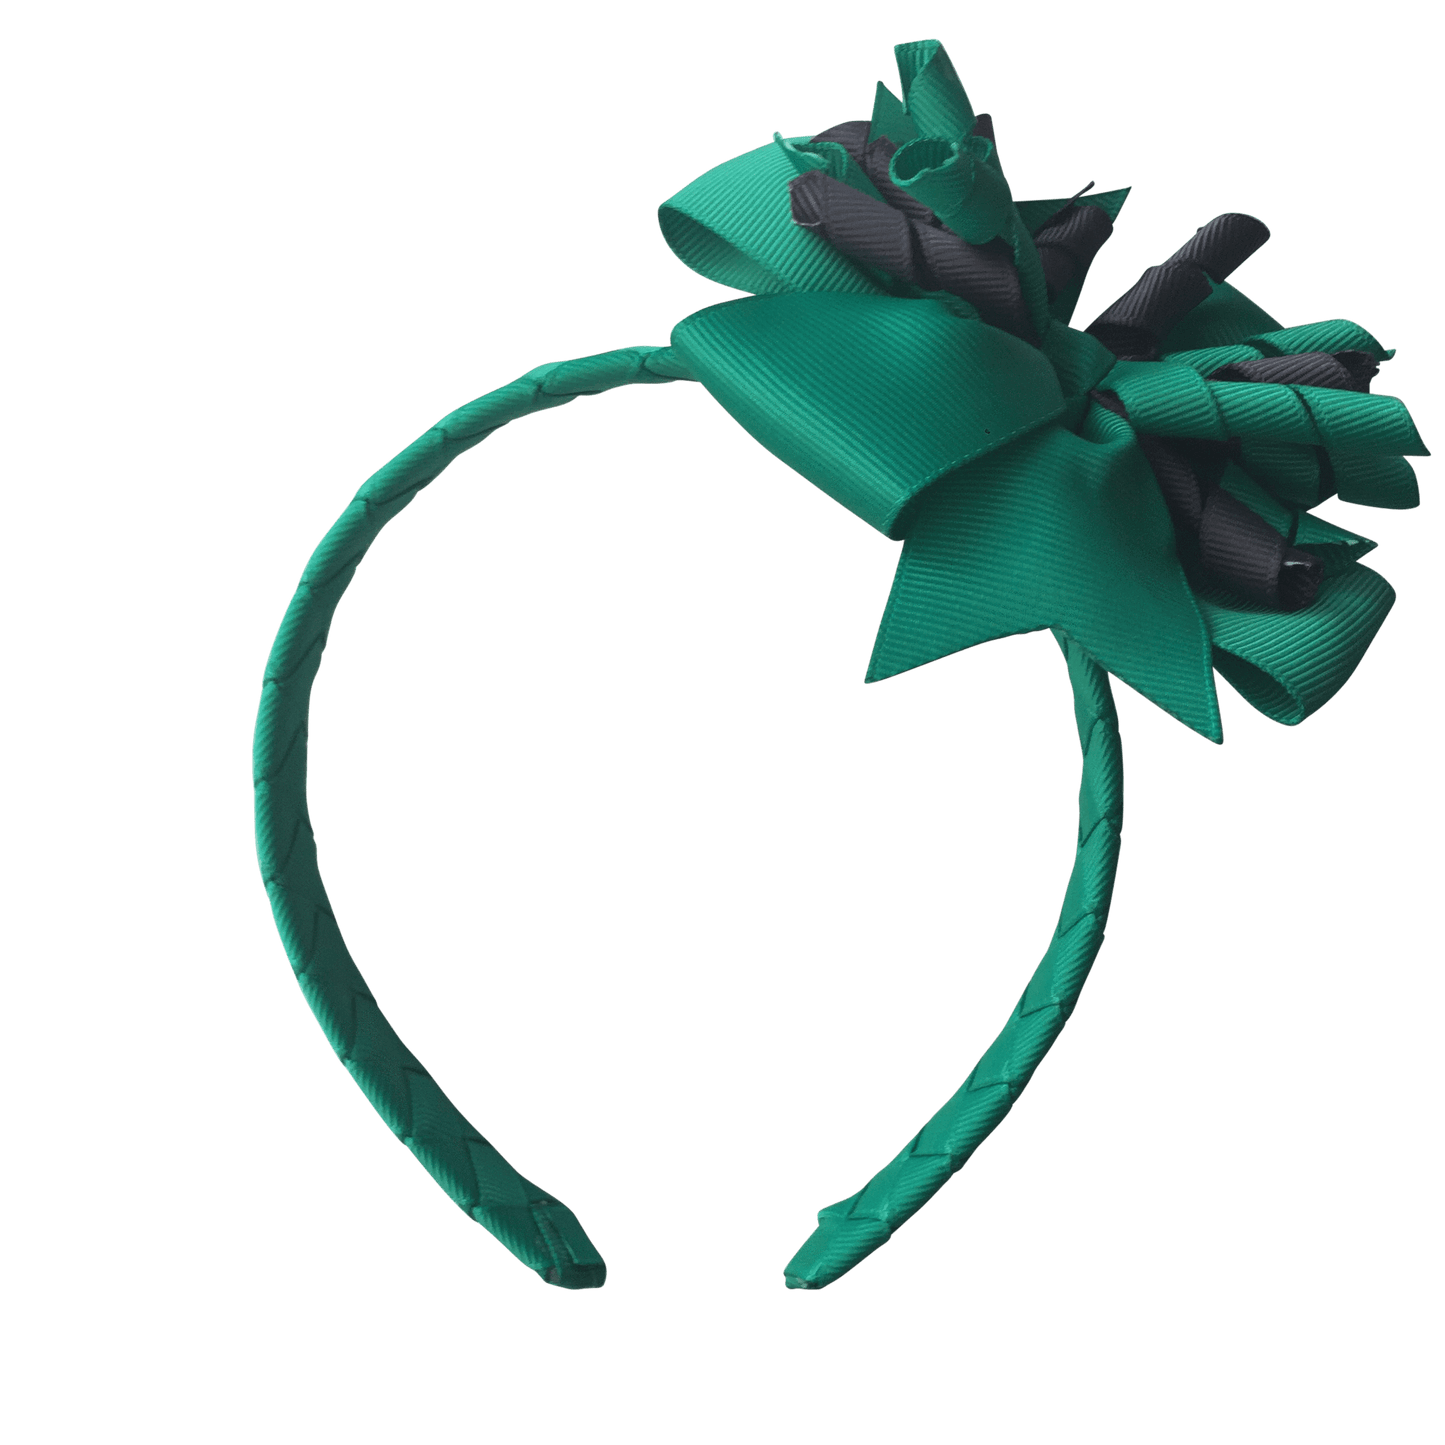 Kelly Green & Grey Hair Accessories - Ponytails and Fairytales